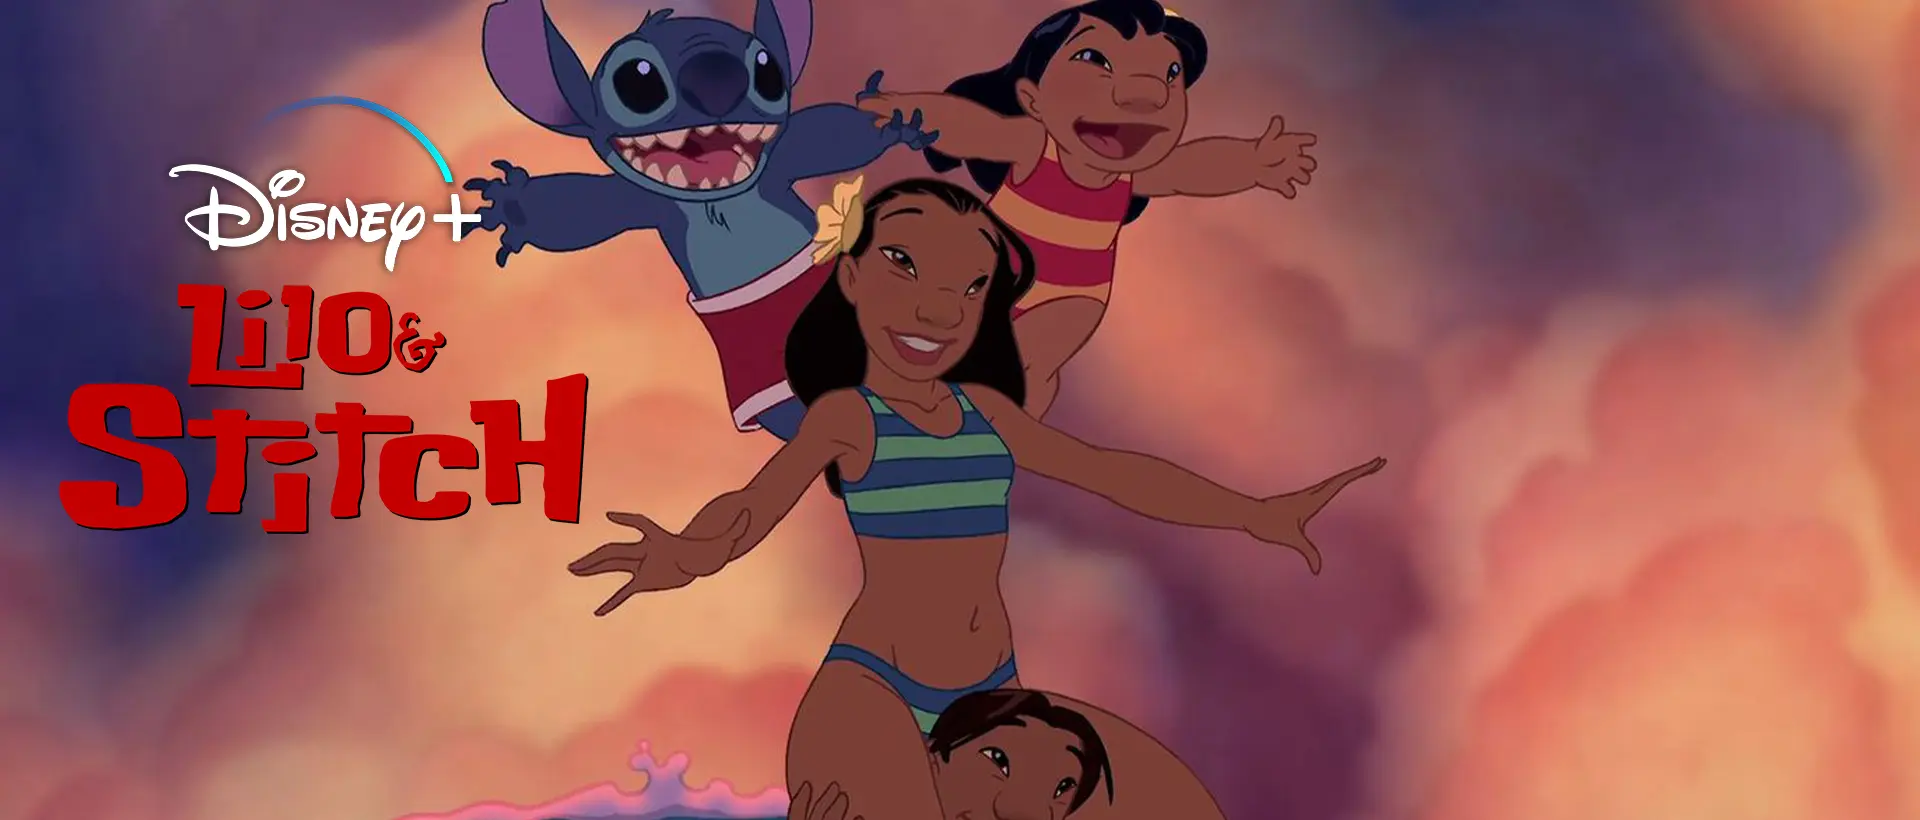 interno boicotear Hierbas Disney's 'Lilo & Stitch' Live-Action Movie Lead Character Breakdowns Go Out  (EXCLUSIVE) - Knight Edge Media